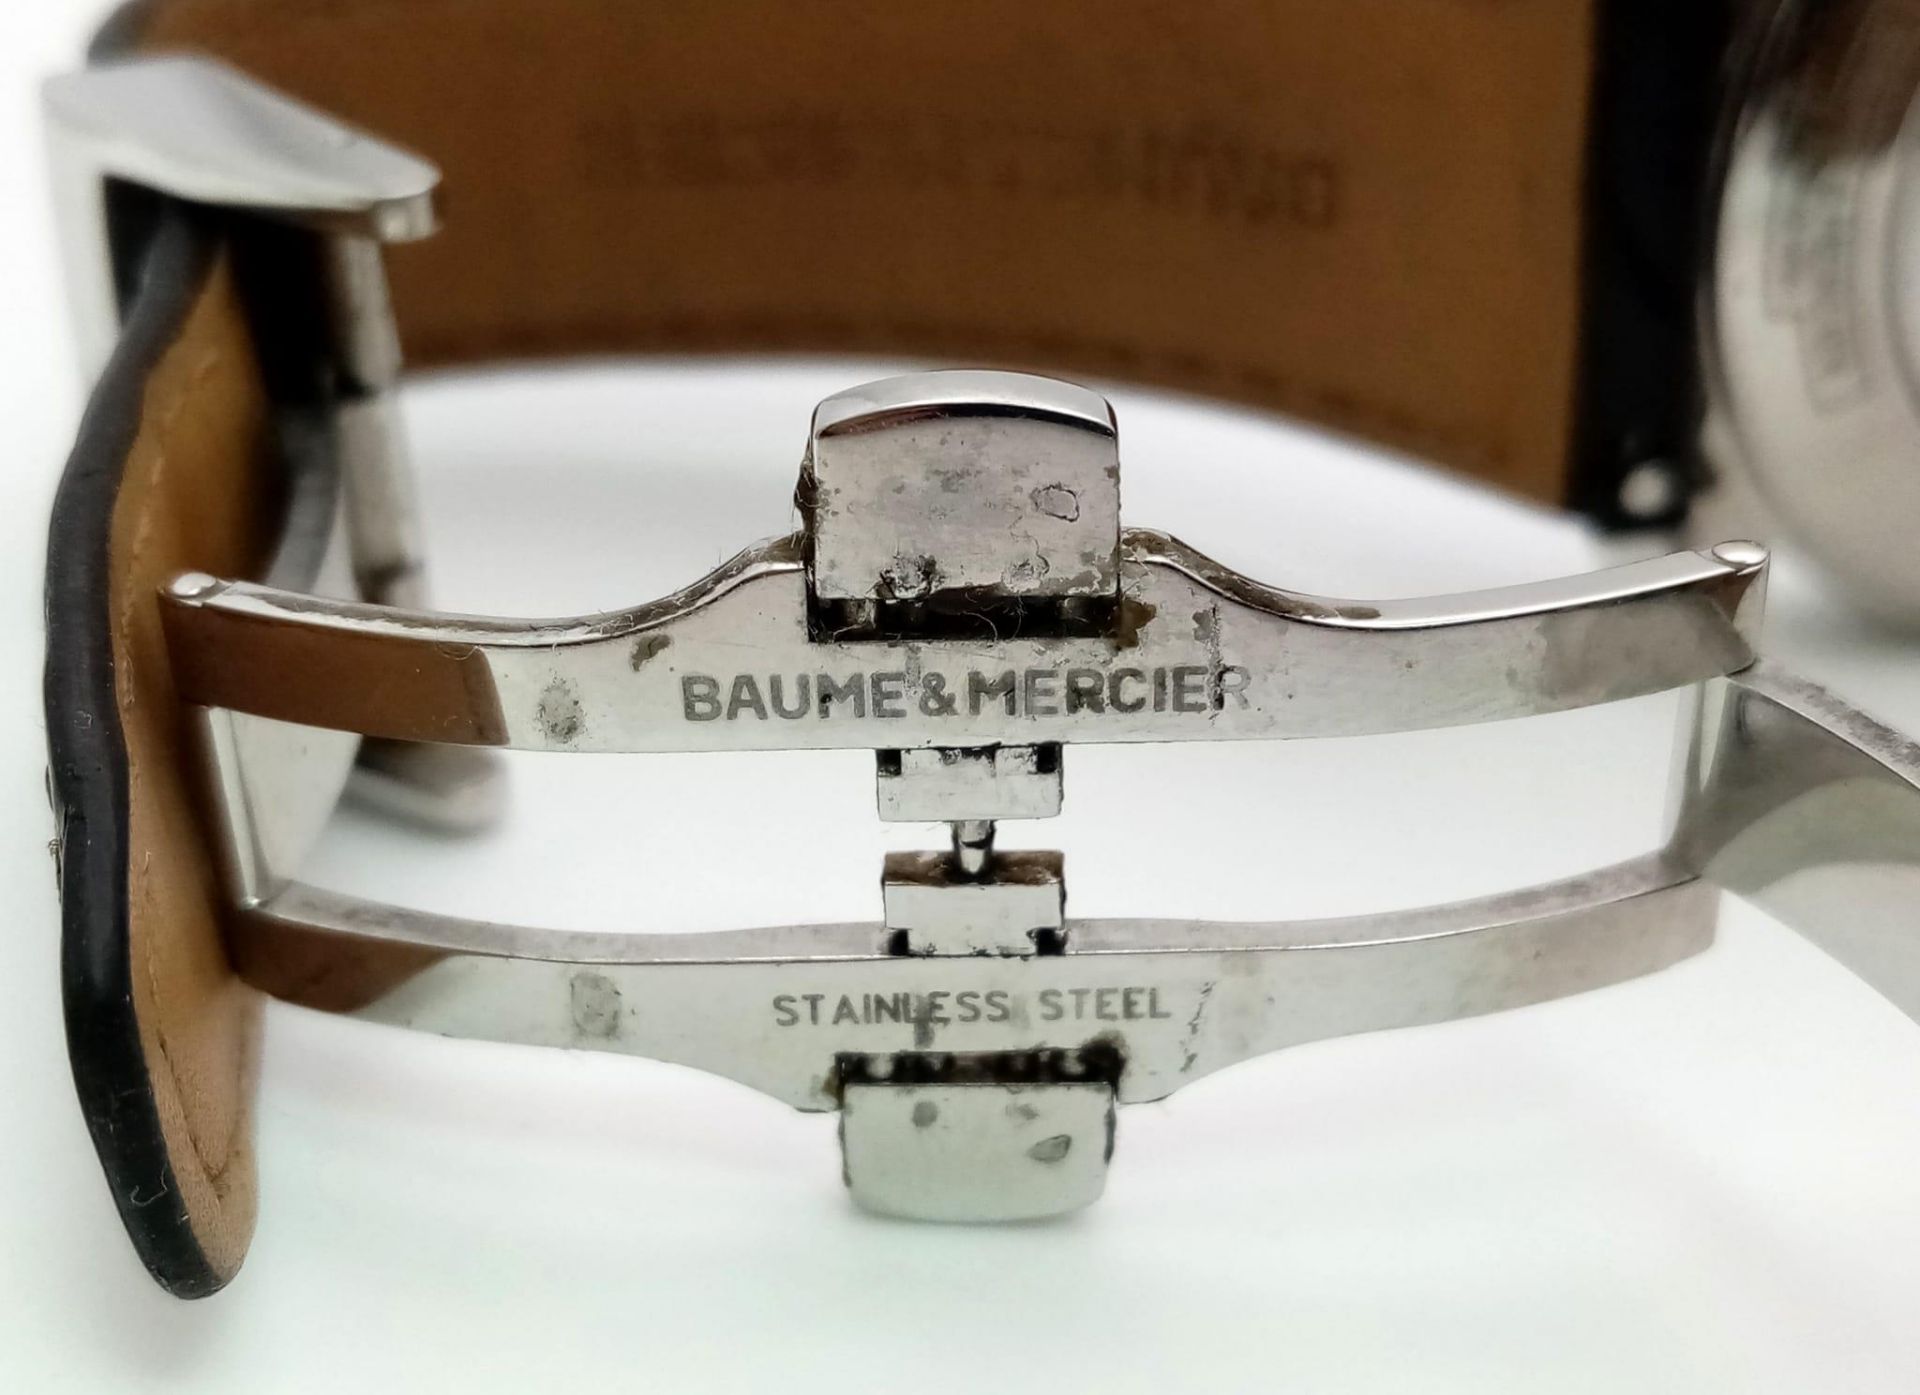 A Baume and Mercier Automatic Gents Watch. Original leather strap. Stainless steel case with - Image 7 of 8